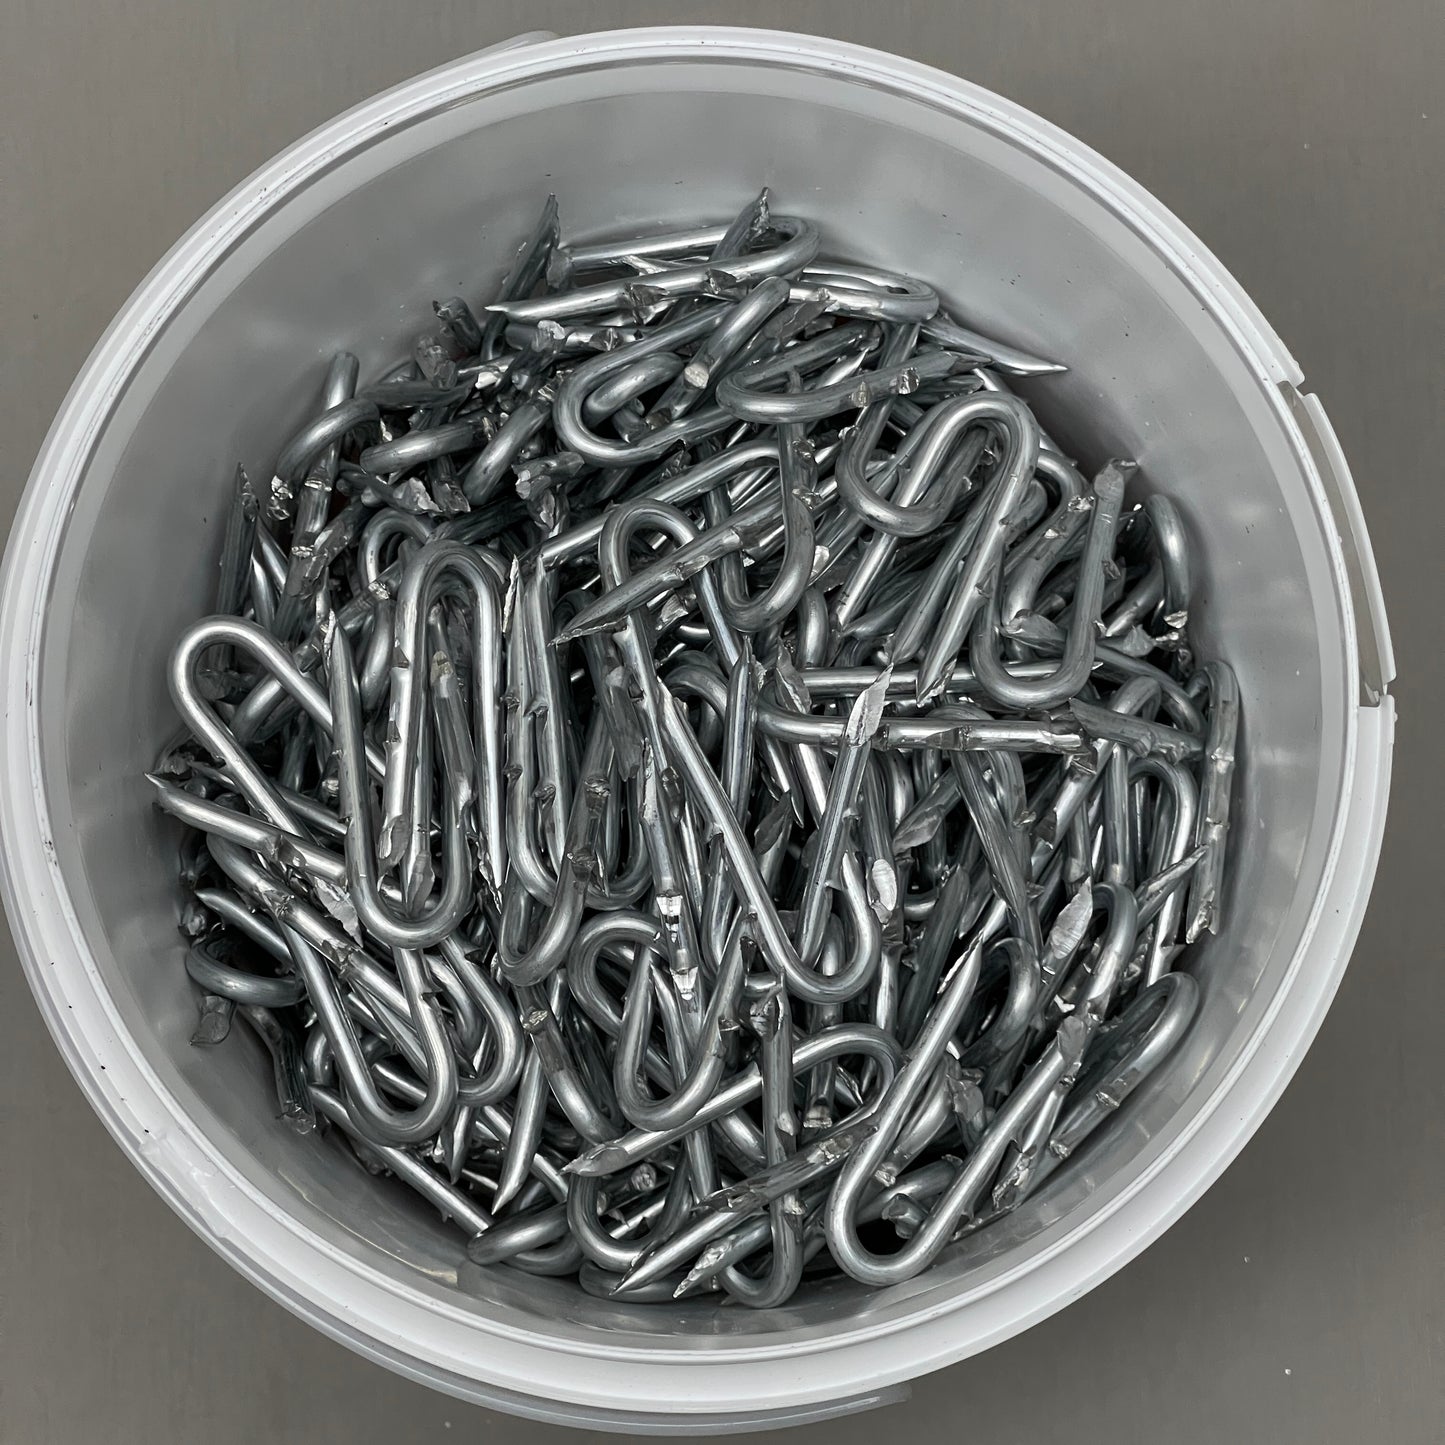 HW BRAND (Hutchinson Inc) Double Barbed Galvanized Fence Staples 1-1/2" 8 lb (New)